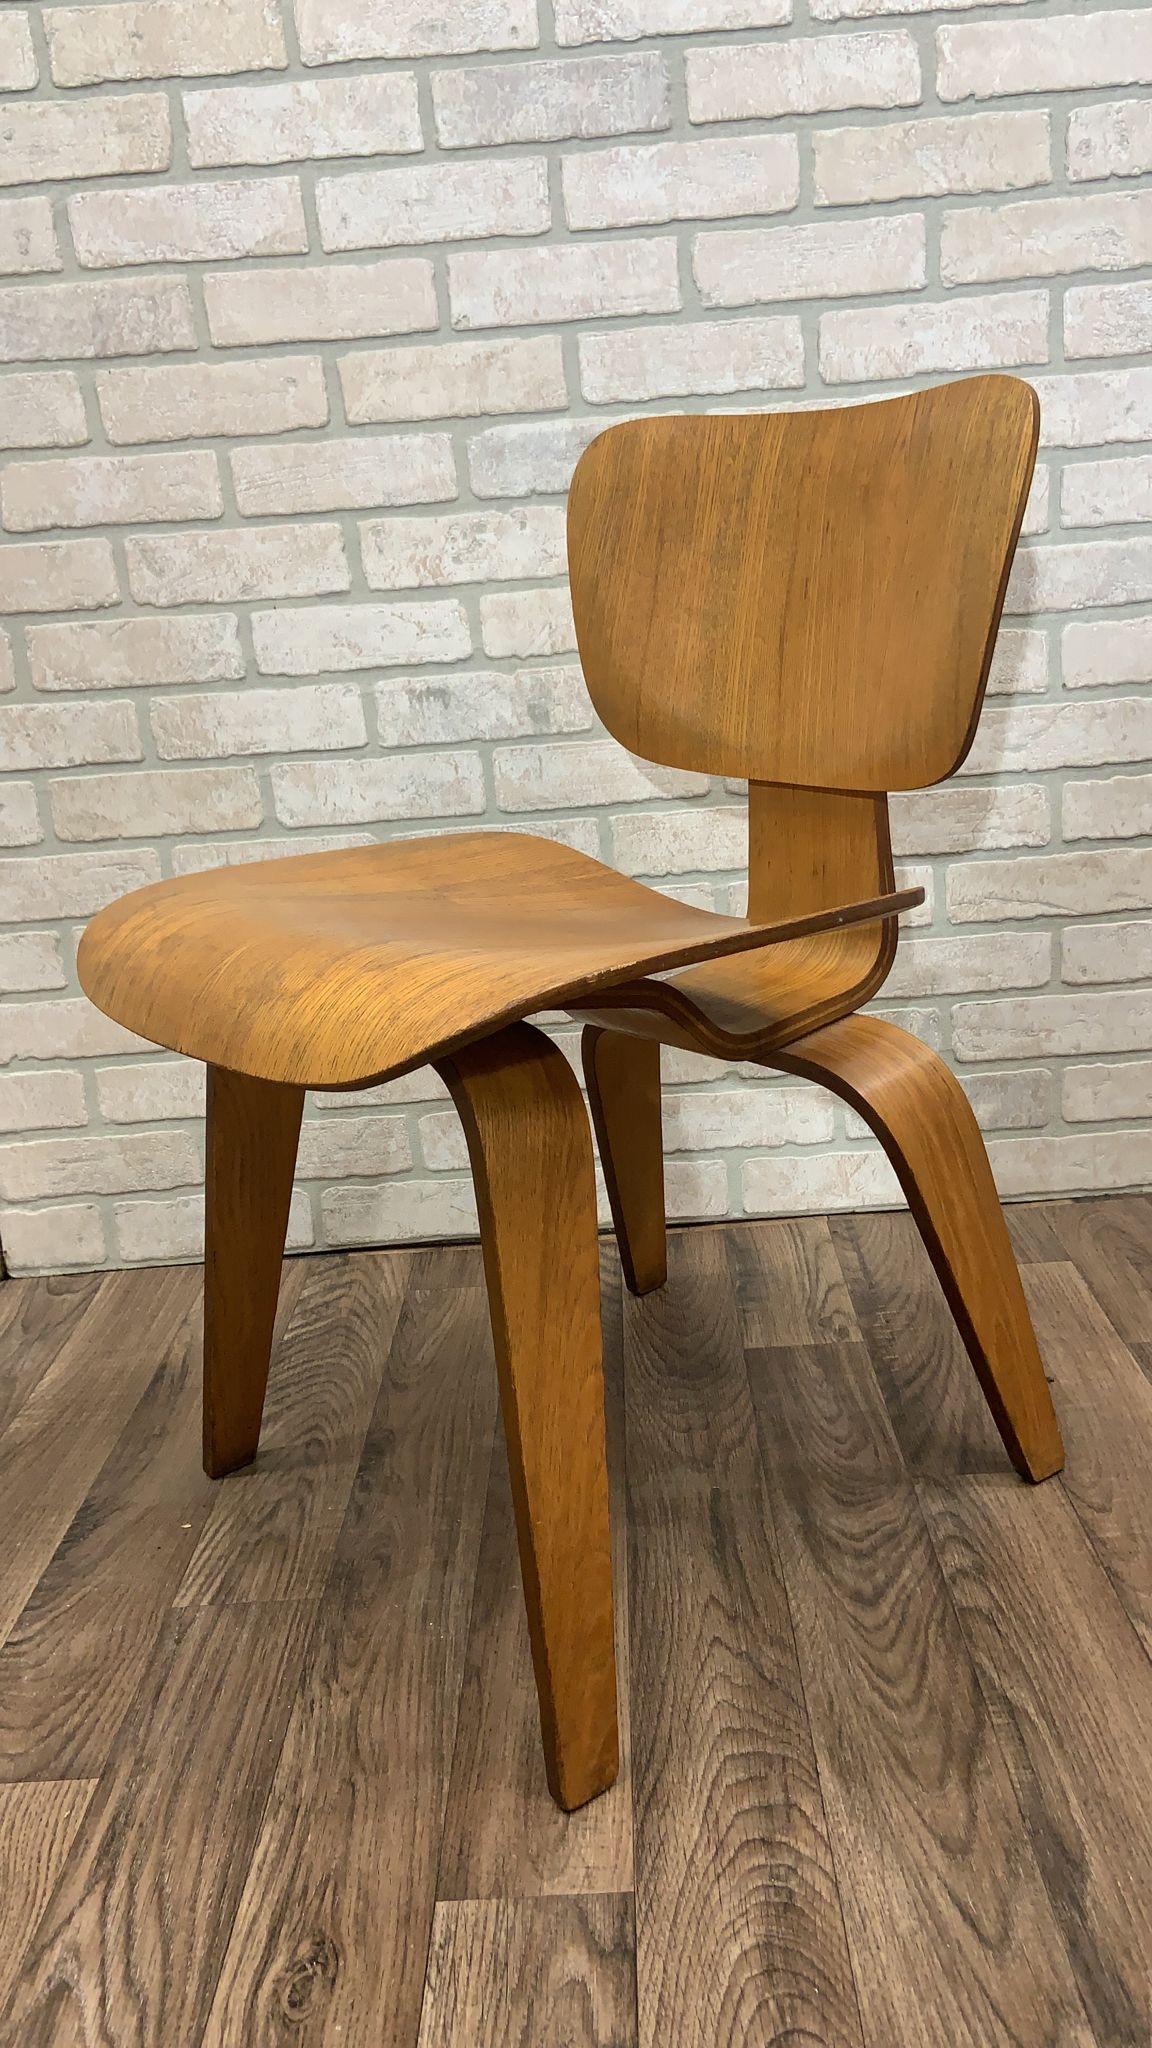 Mid Century Modern Early Eames Style Screw Configuration Bentwood LCW Lounge Chair

The Mid Century Modern Early Eames Style Screw Configuration Bentwood LCW Lounge Chair is a classic piece of furniture inspired by the design principles of Charles